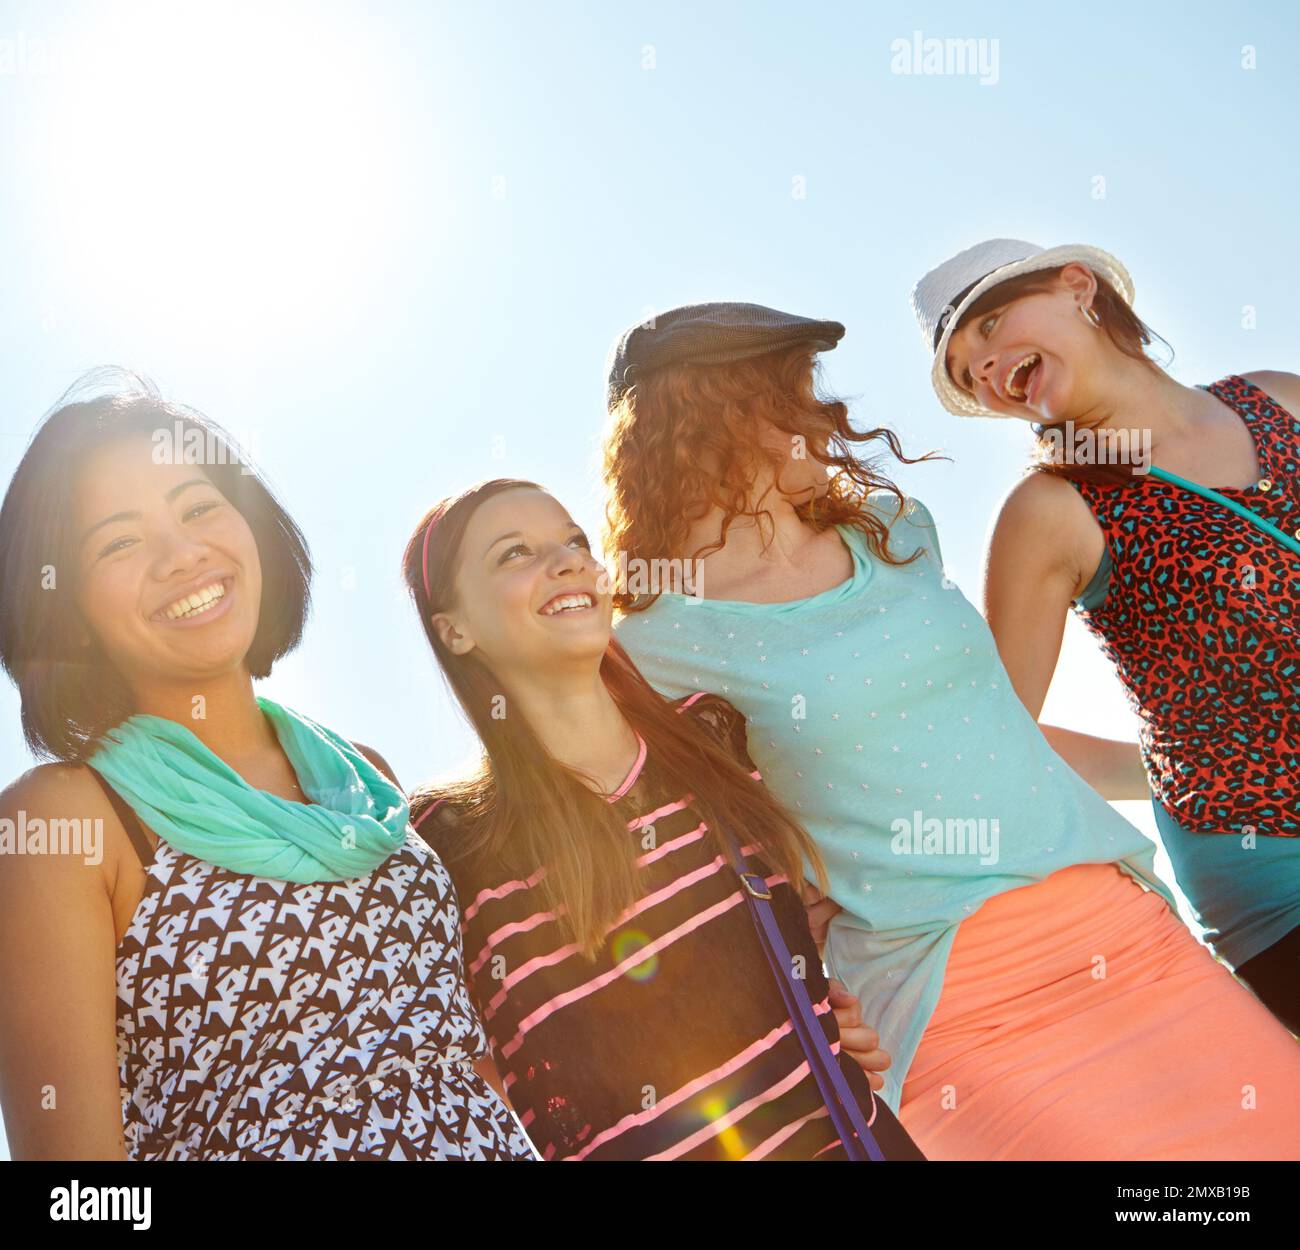 Summertime fun with the girls. Low-angle view of a group of teeange girls walking outside with their arms entwined. Stock Photo